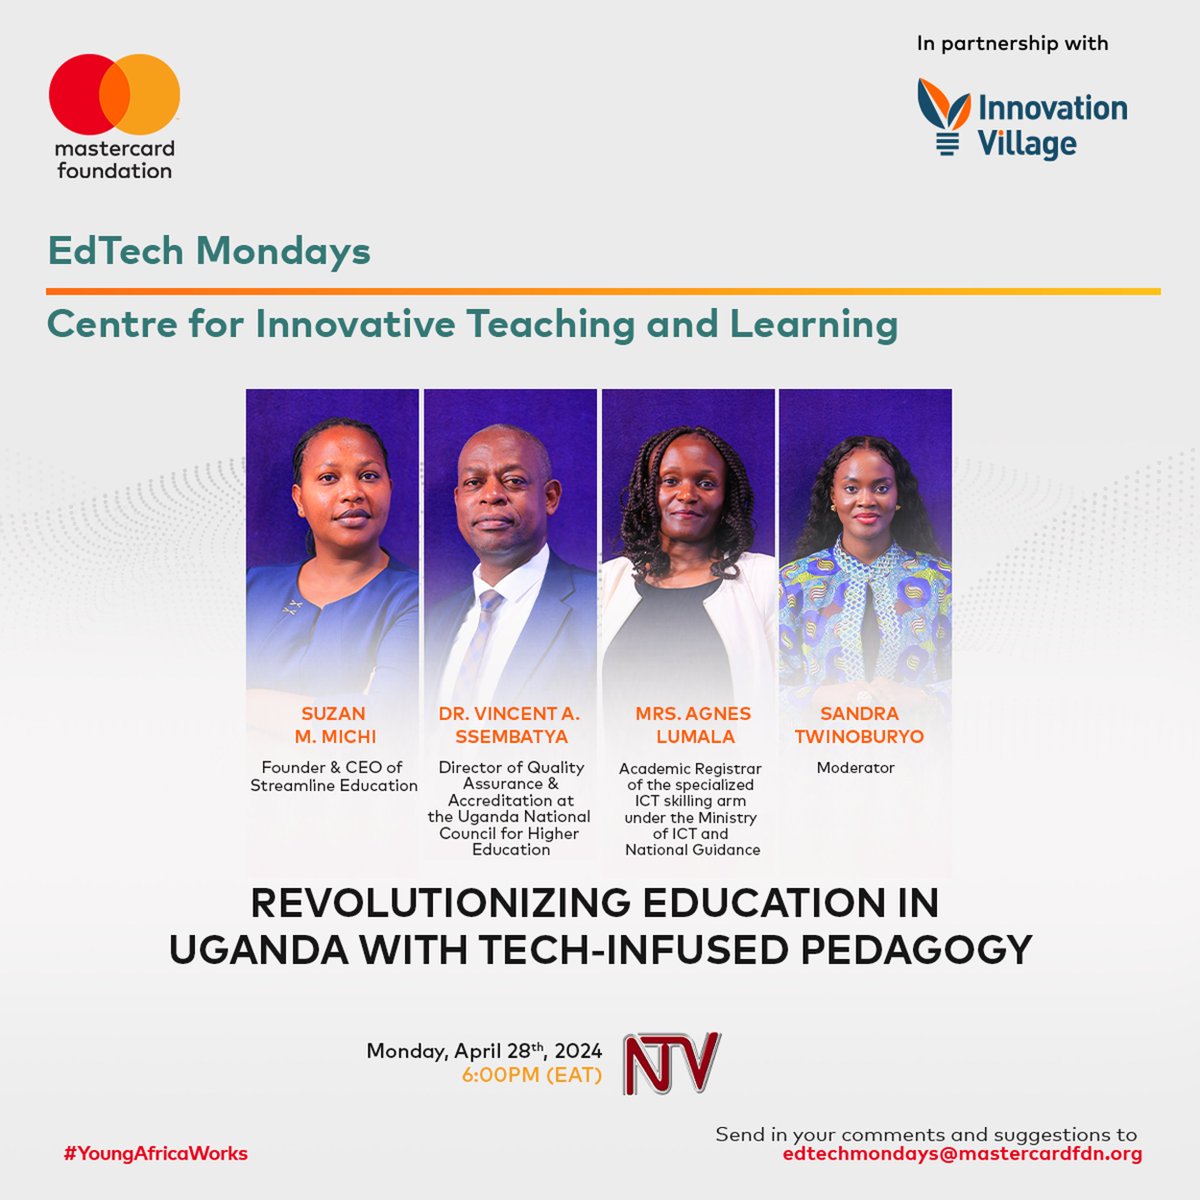 #TBT The transformation of #EdTech in Uganda's education sector extends beyond mere gadget adoption. It aims to foster a dynamic, engaging, and inclusive learning environment, marking a significant paradigm shift crucial for unlocking Uganda's educational potential and